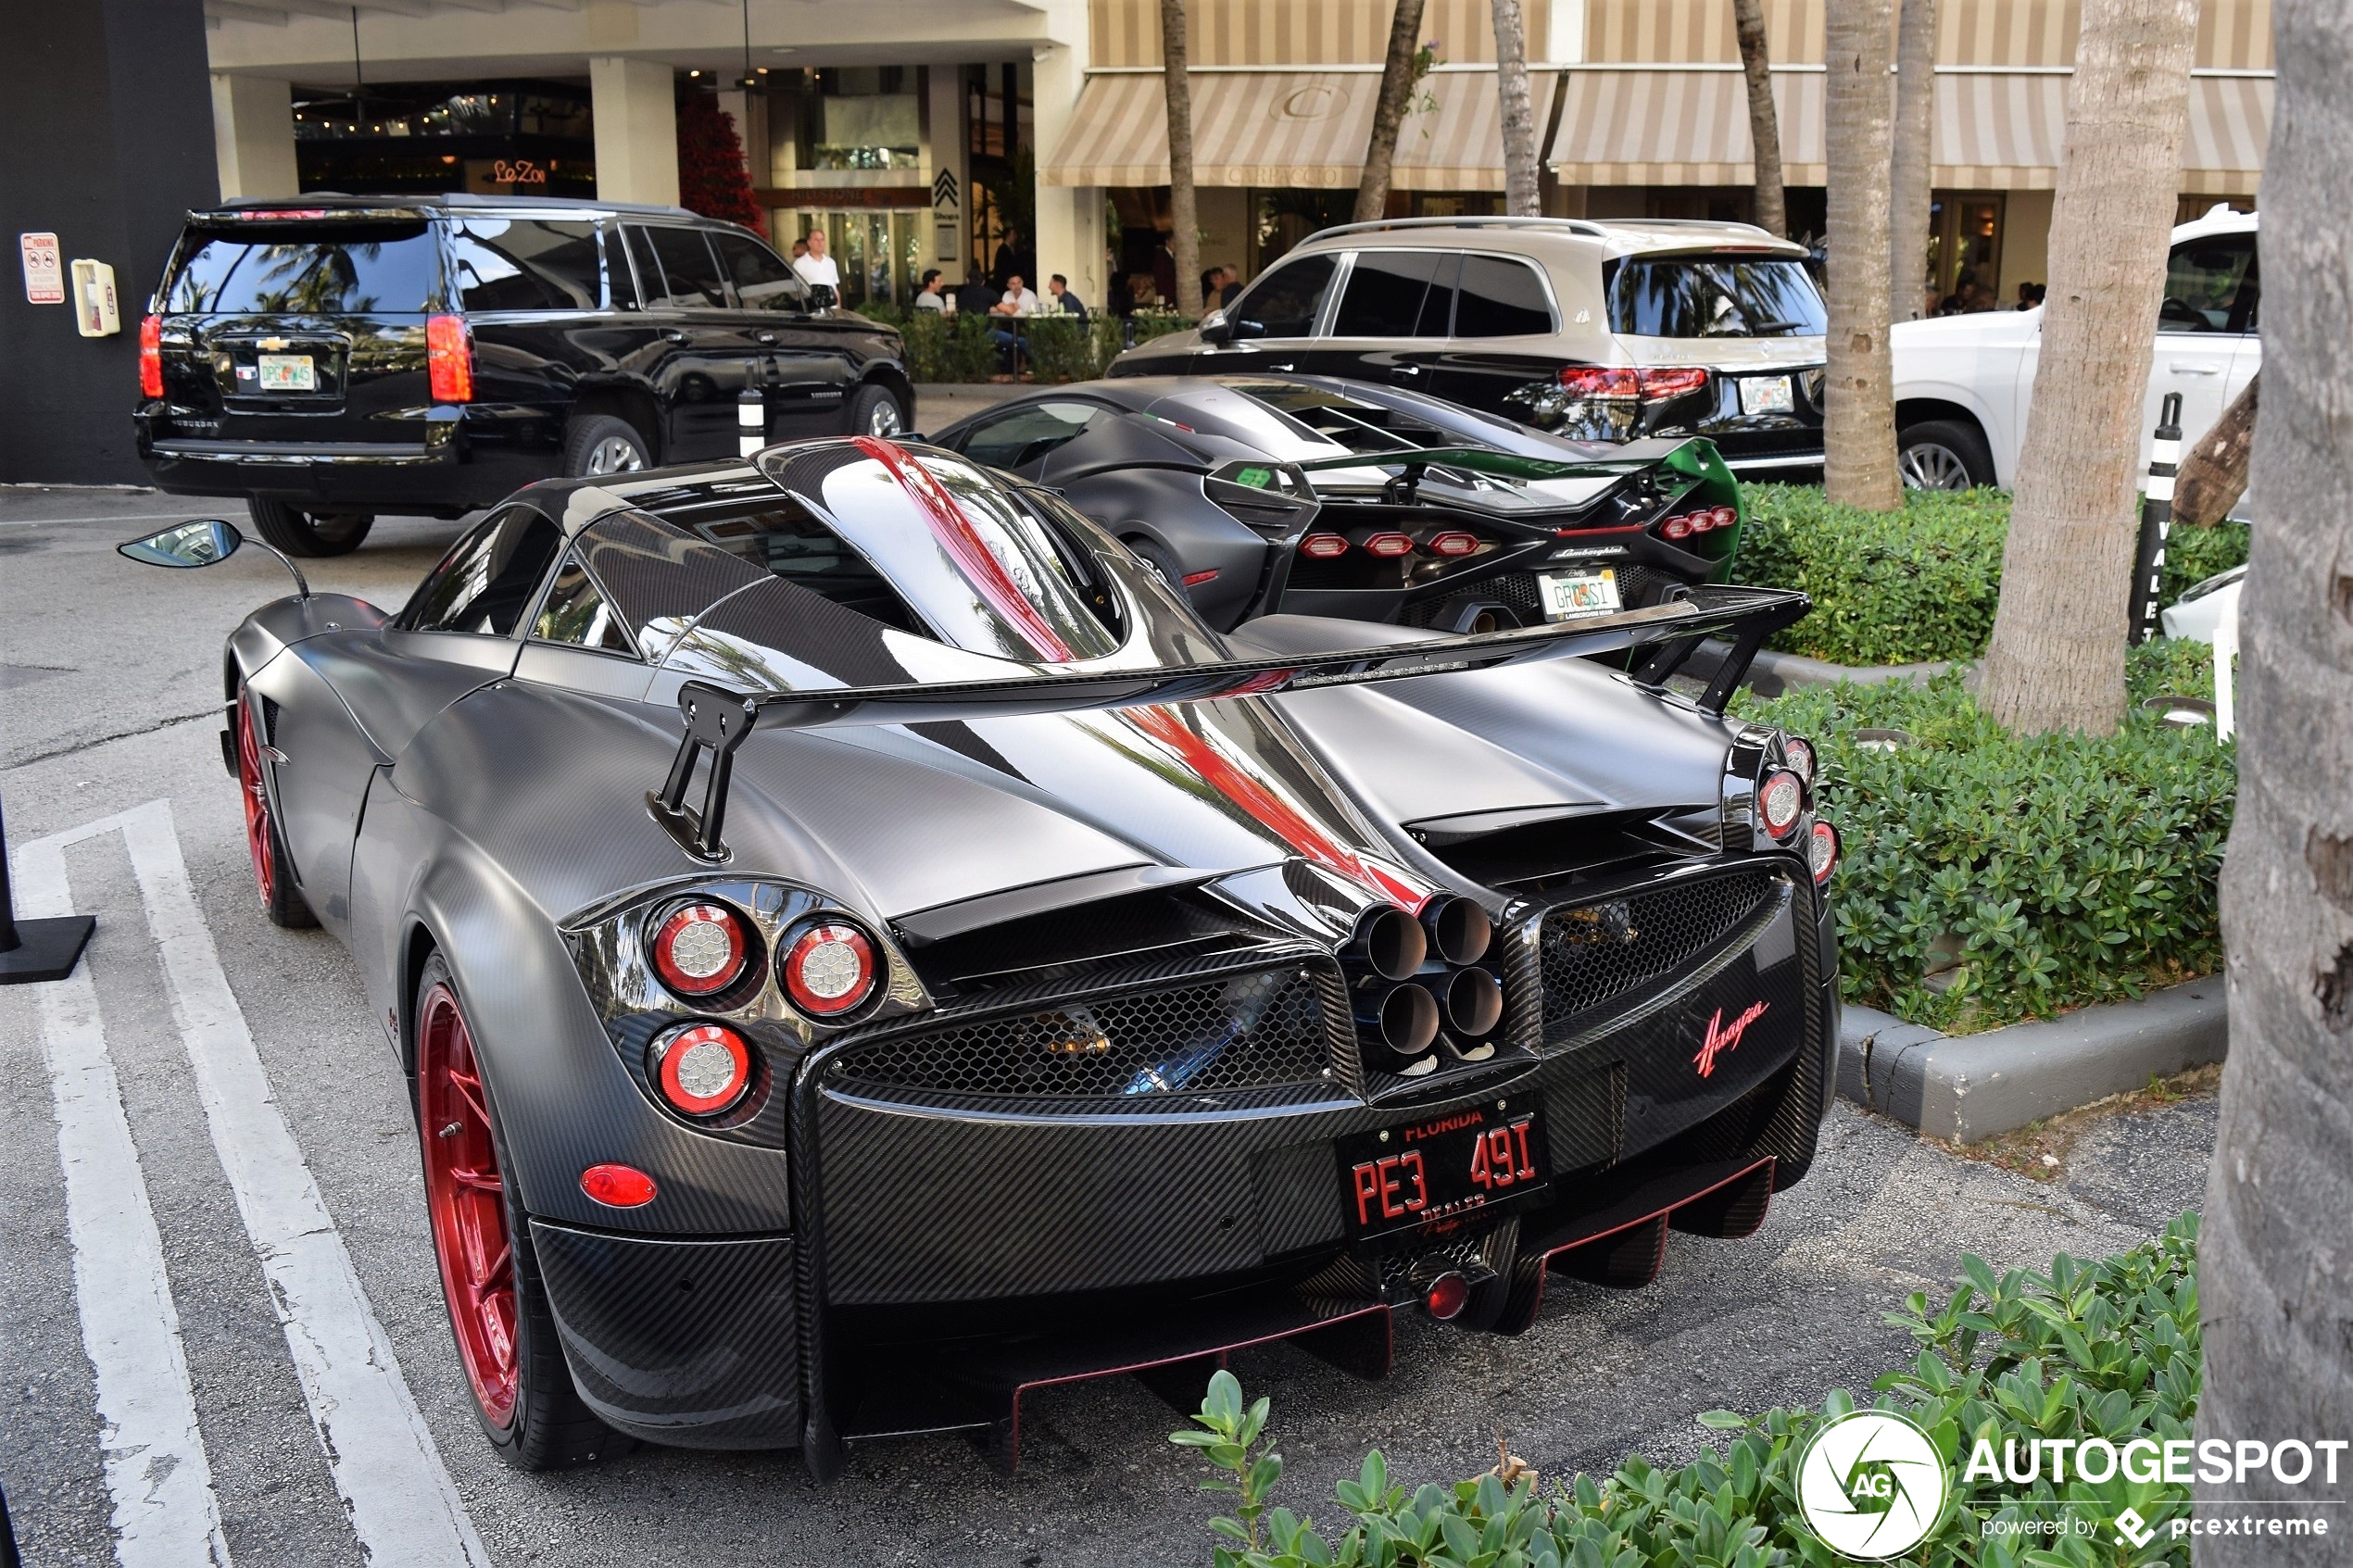 Pagani Huayra Project Vulcan is the star in this combo